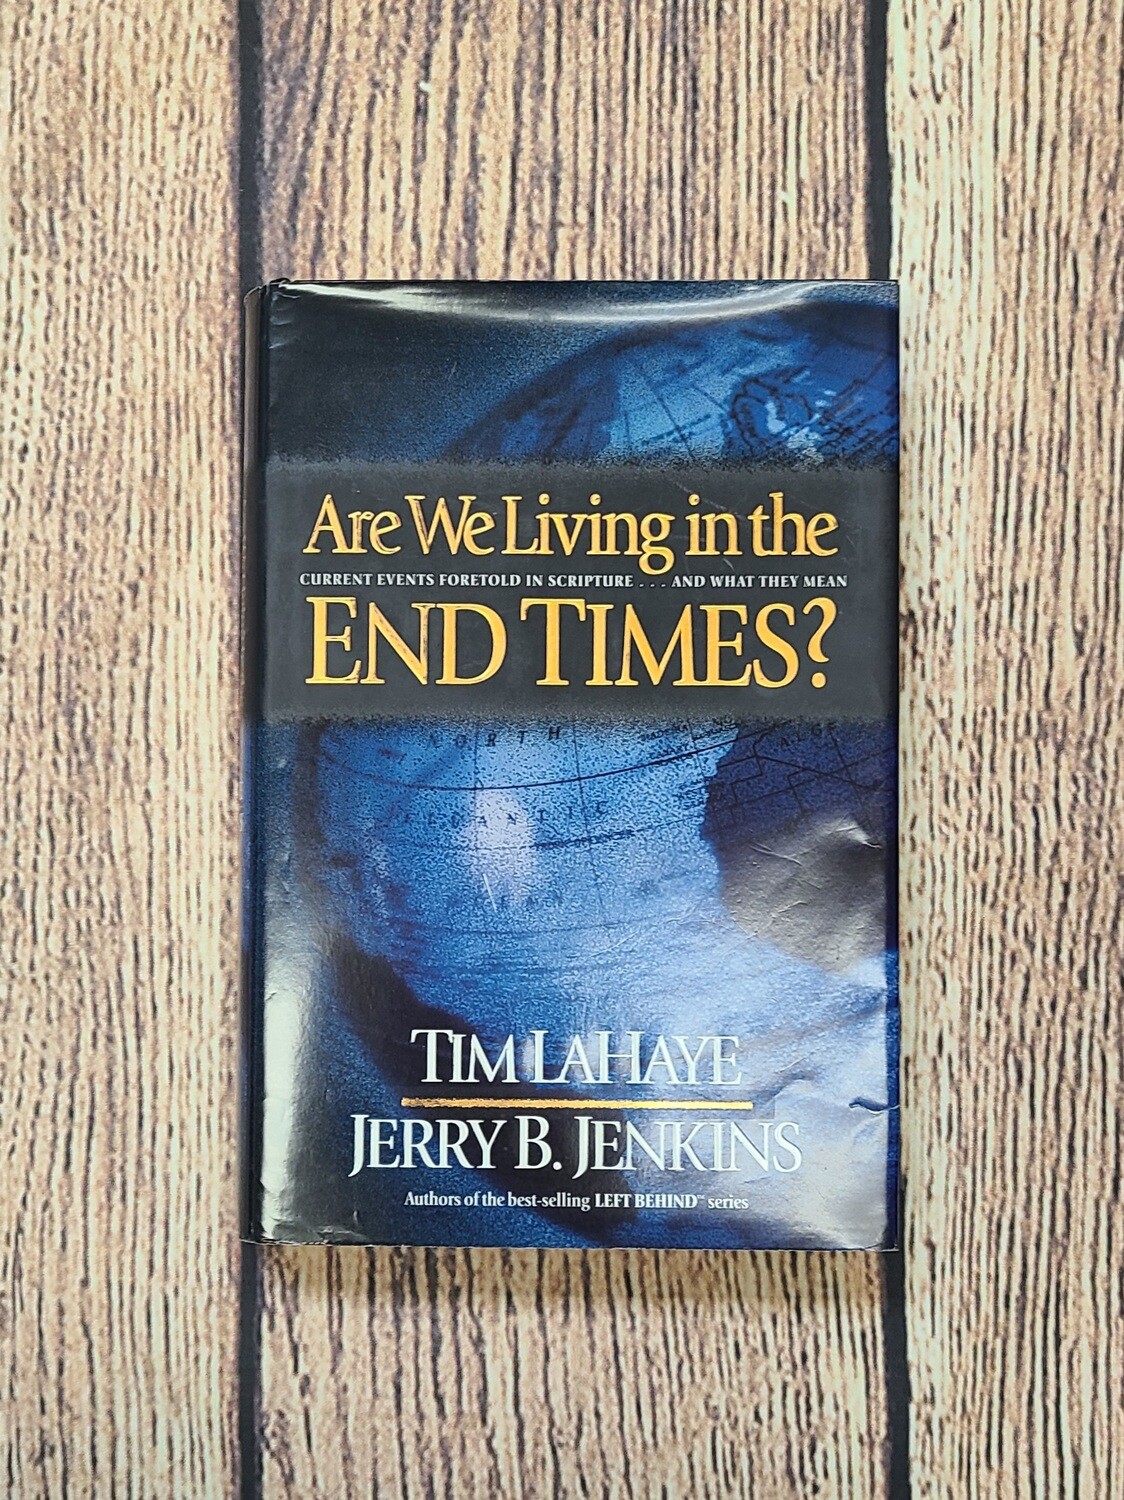 Are We Living in the End Times? by Tim LaHaye and Jerry B. Jenkins